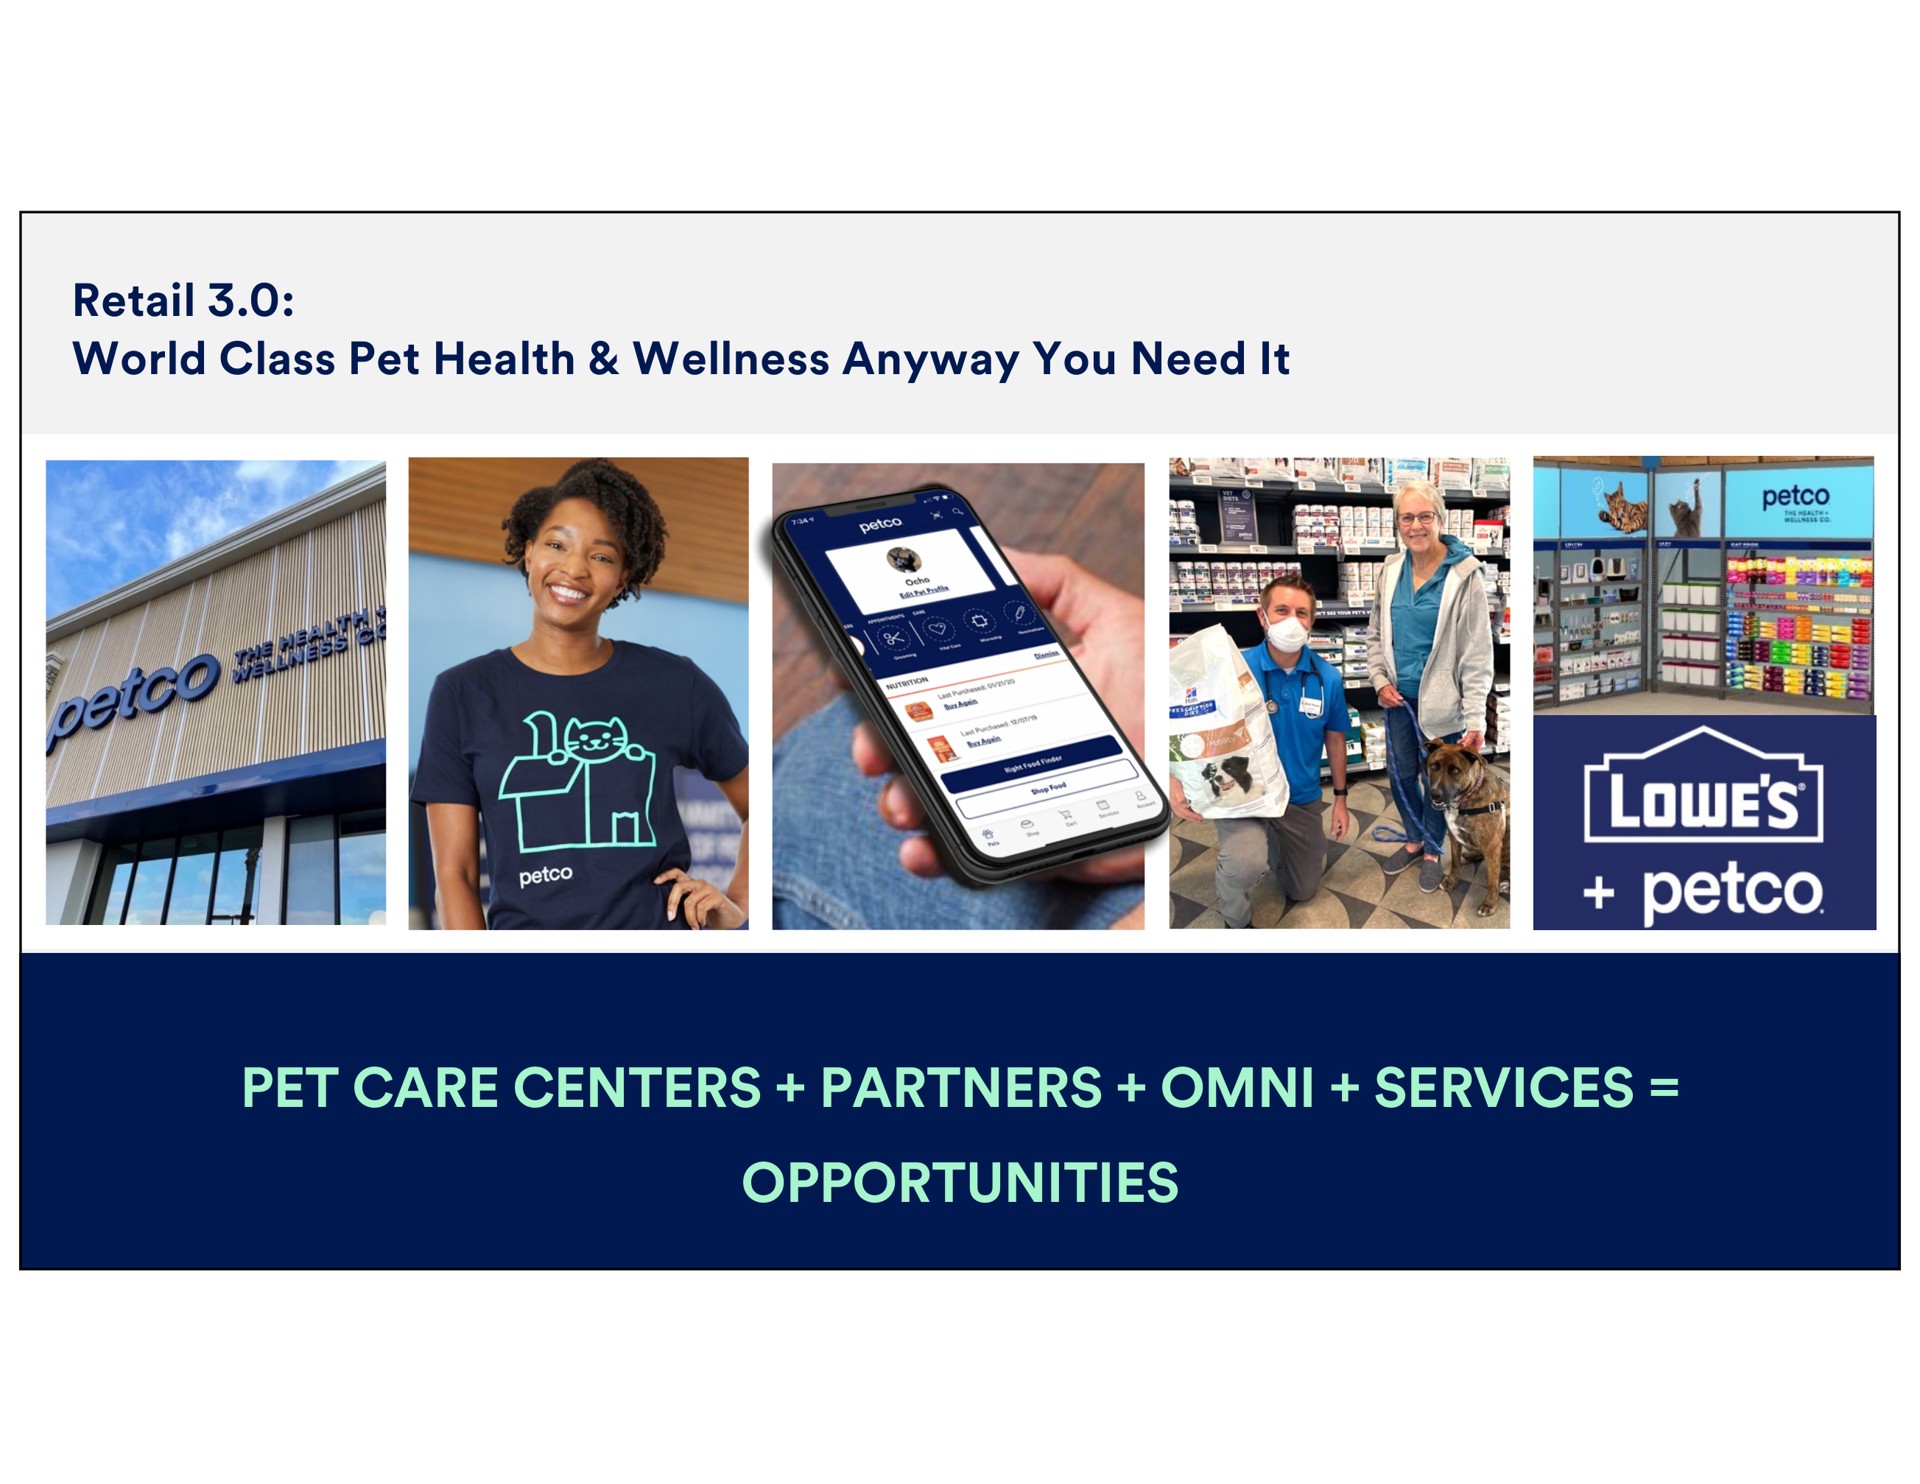 retail world class pet health wellness anyway you need it pet care centers partners services opportunities | Petco